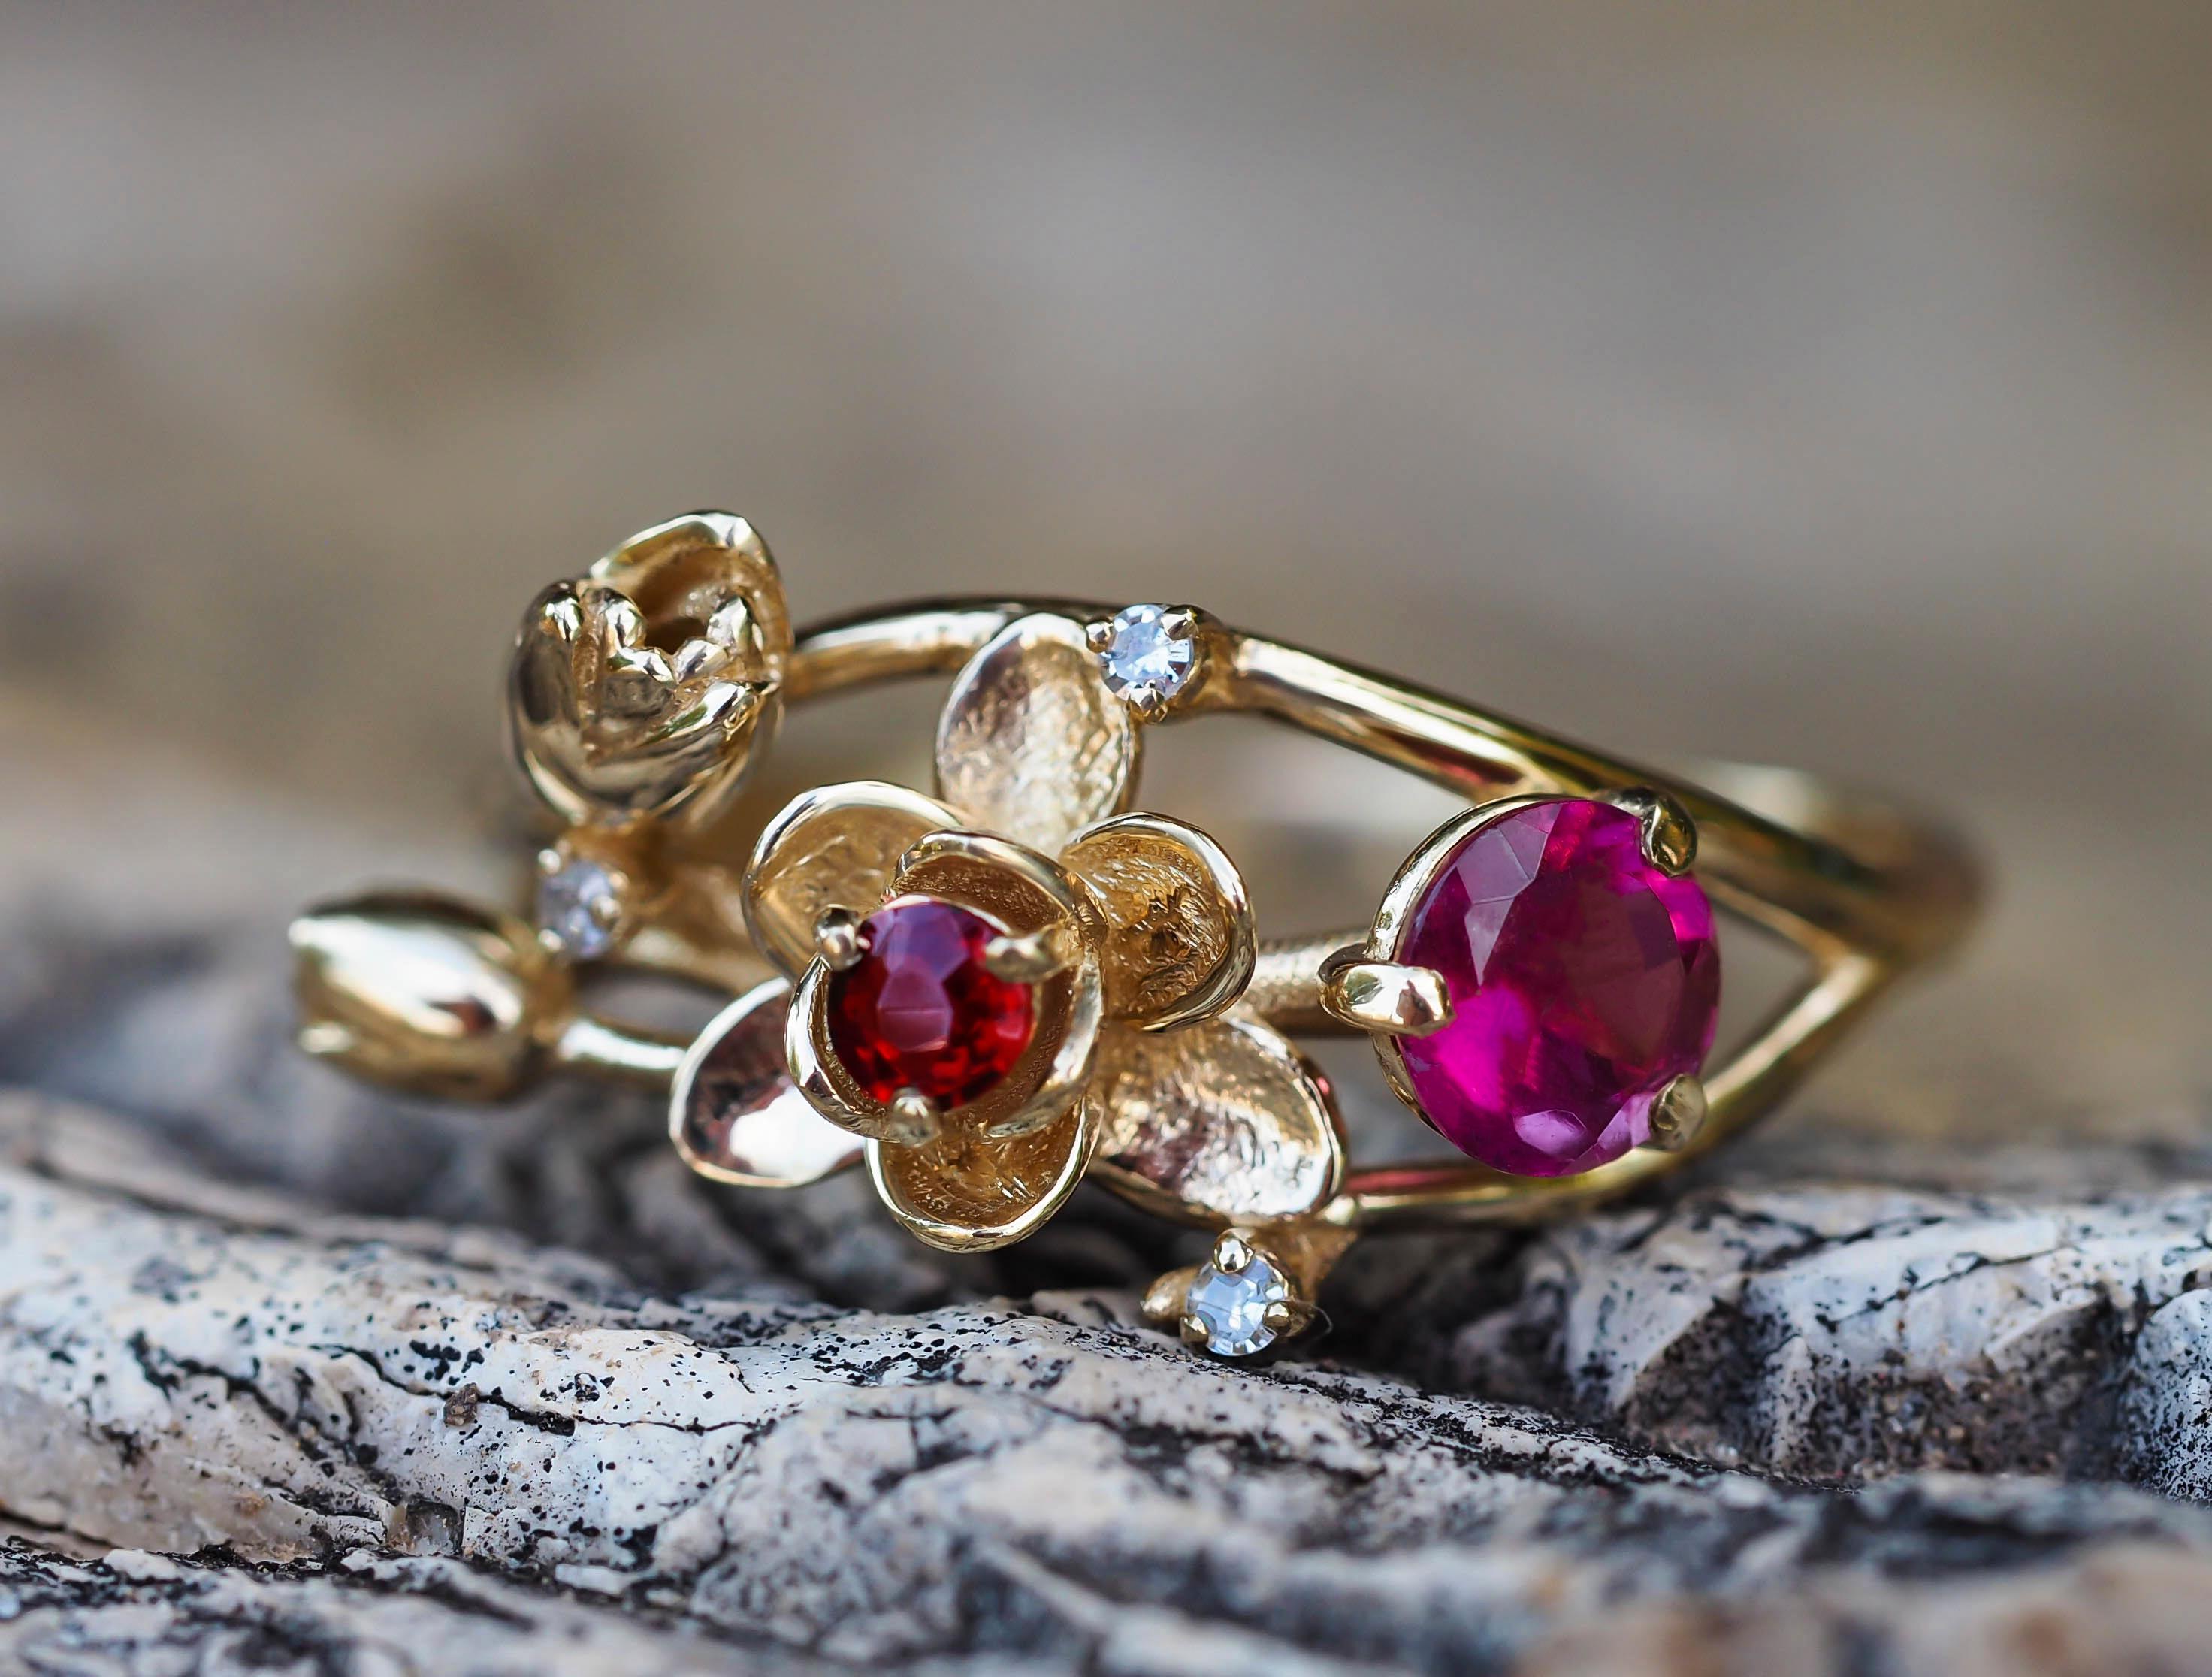 For Sale:  Ruby ring. 14k Gold Ring with Ruby, Garnet and Diamonds. Orchid Flower Ring. 10